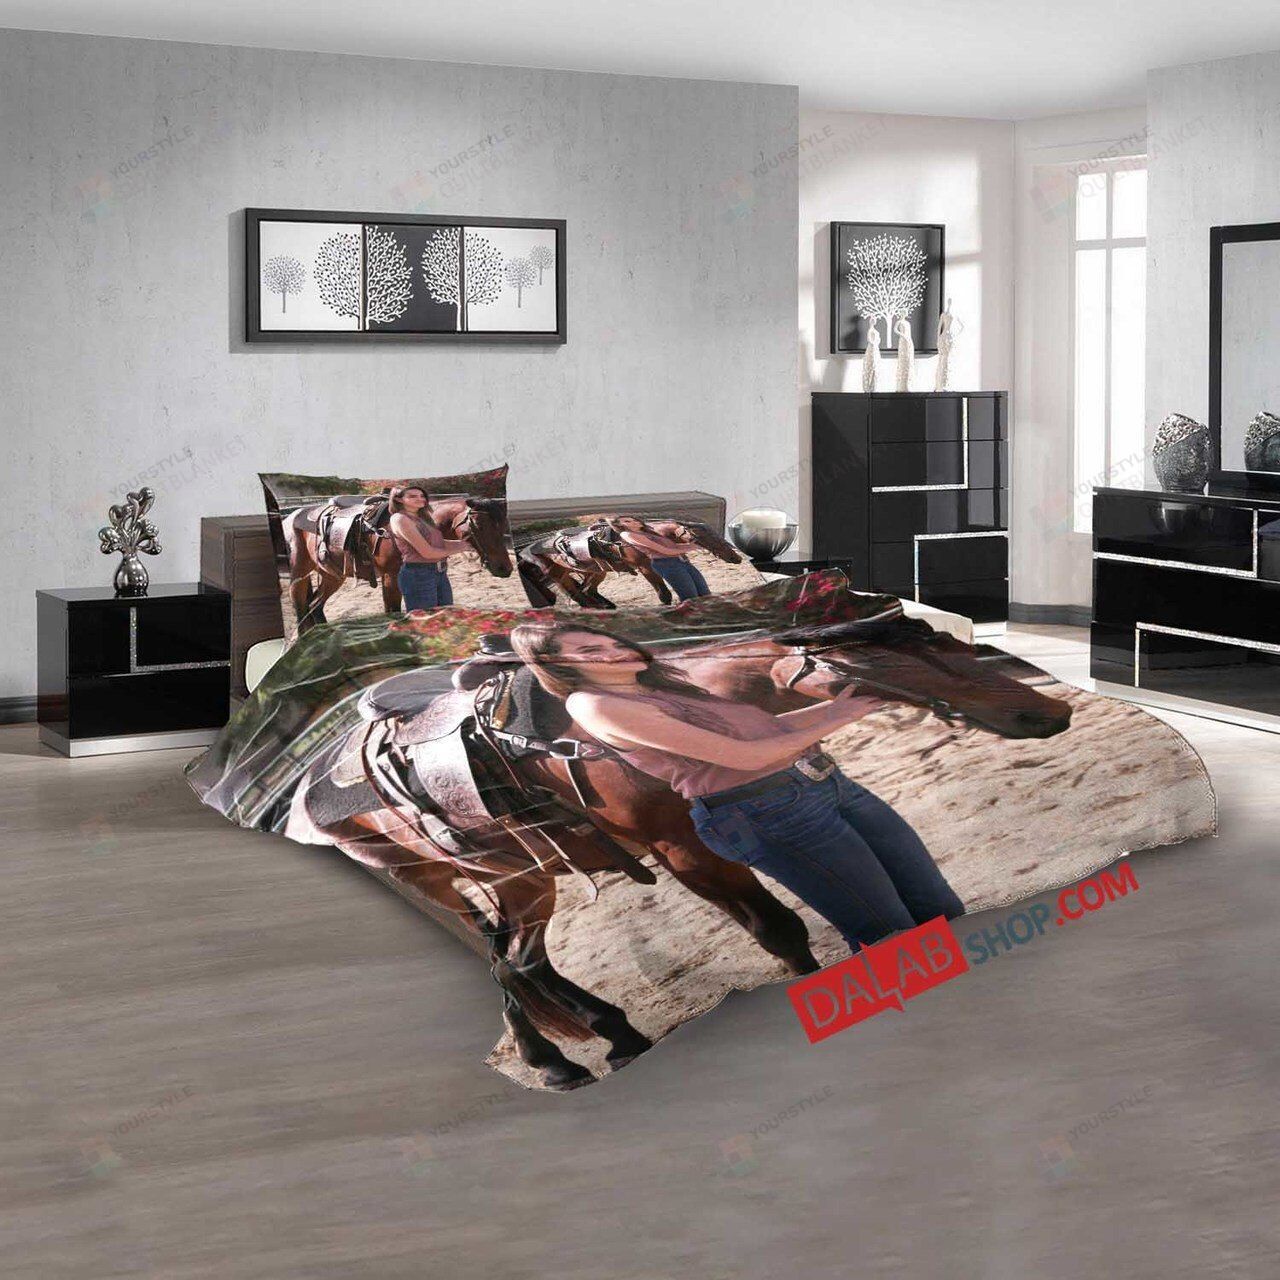 Movie A Cowgirl'S Story V 3d Customized Duvet Cover Bedroom Sets Bedding Sets